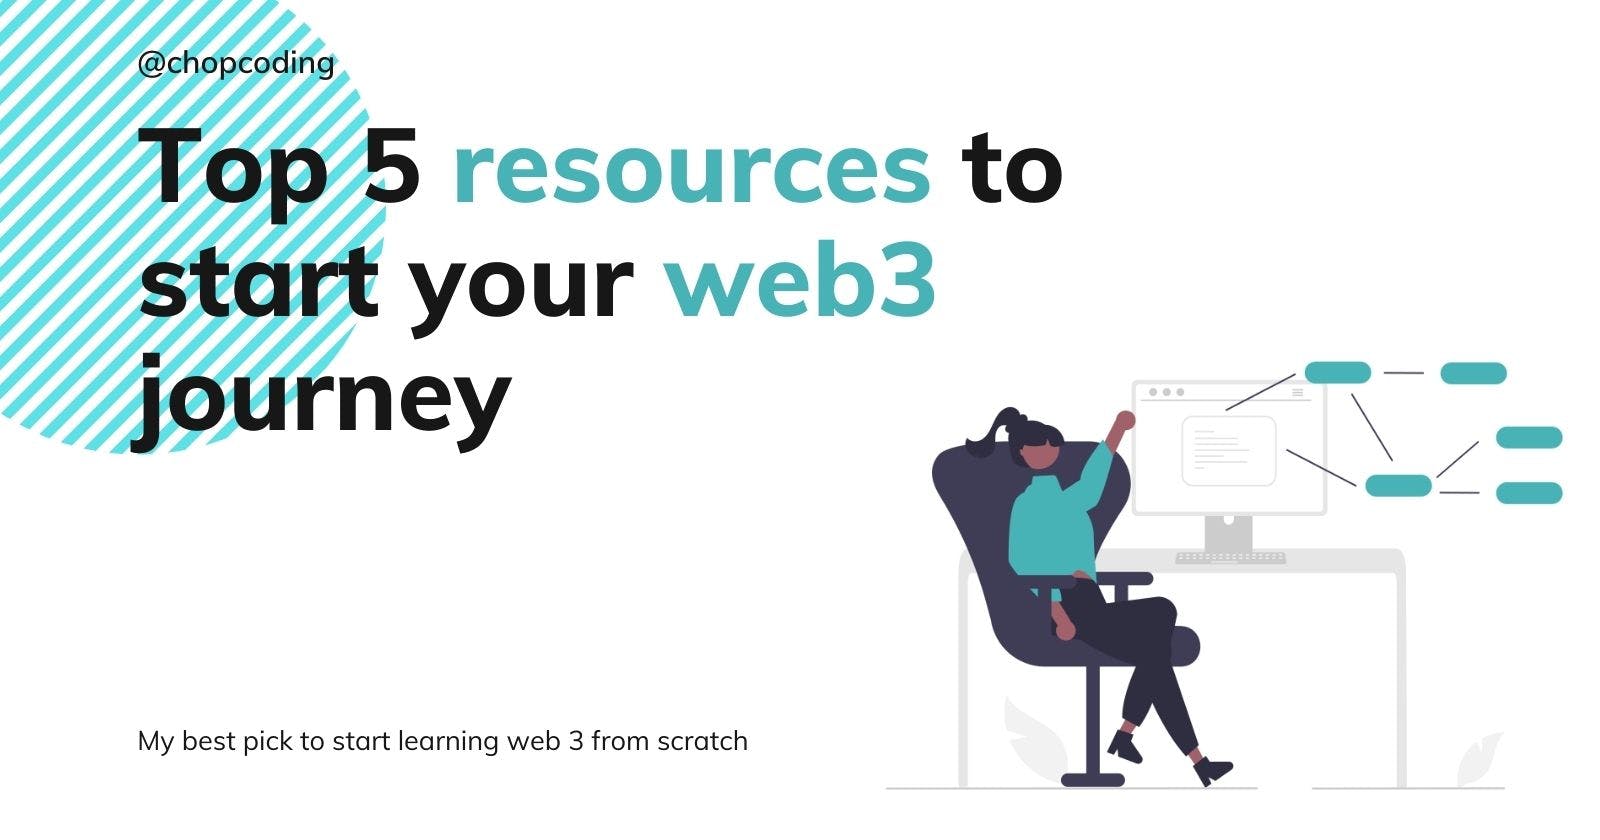 Top 5 resources to start your web3 journey